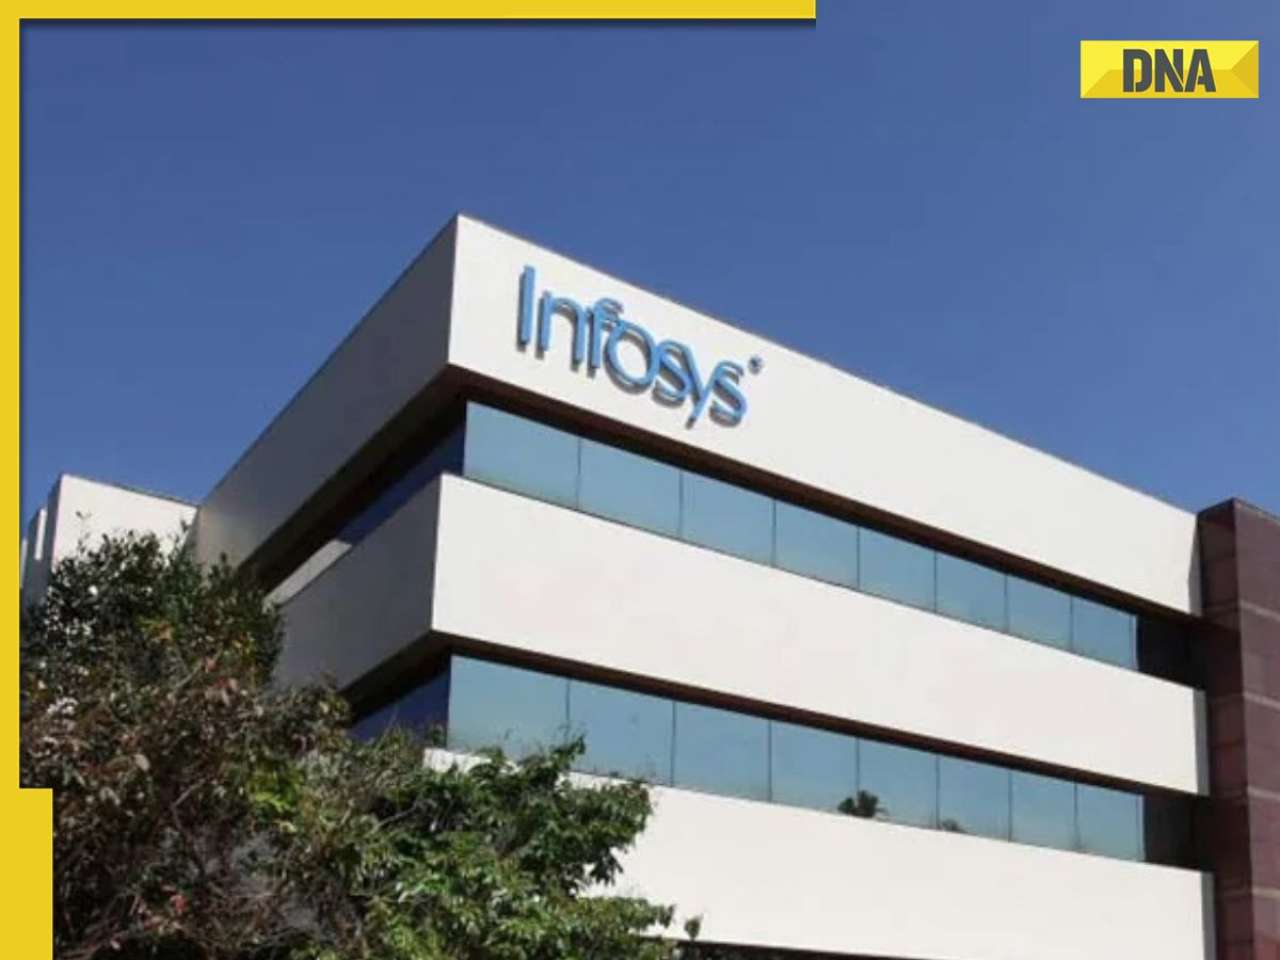 Narayana Murthy’s Infosys to get Rs 63290000000, asked to tune Rs 2763 crore by...